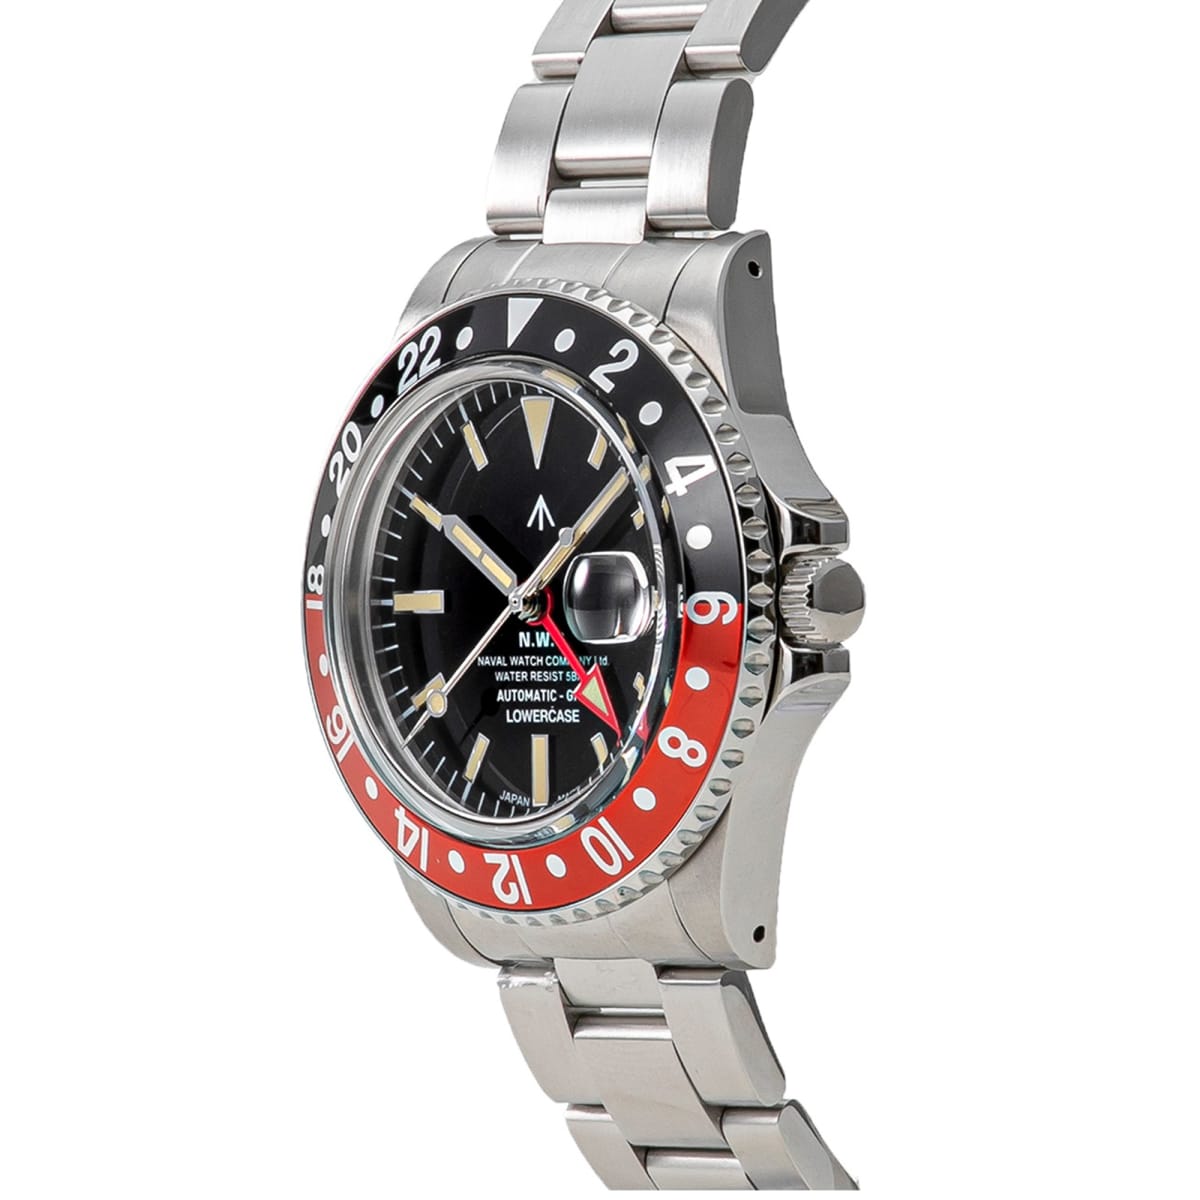 Naval Watch and Lowercase's new GMT is a tribute to a